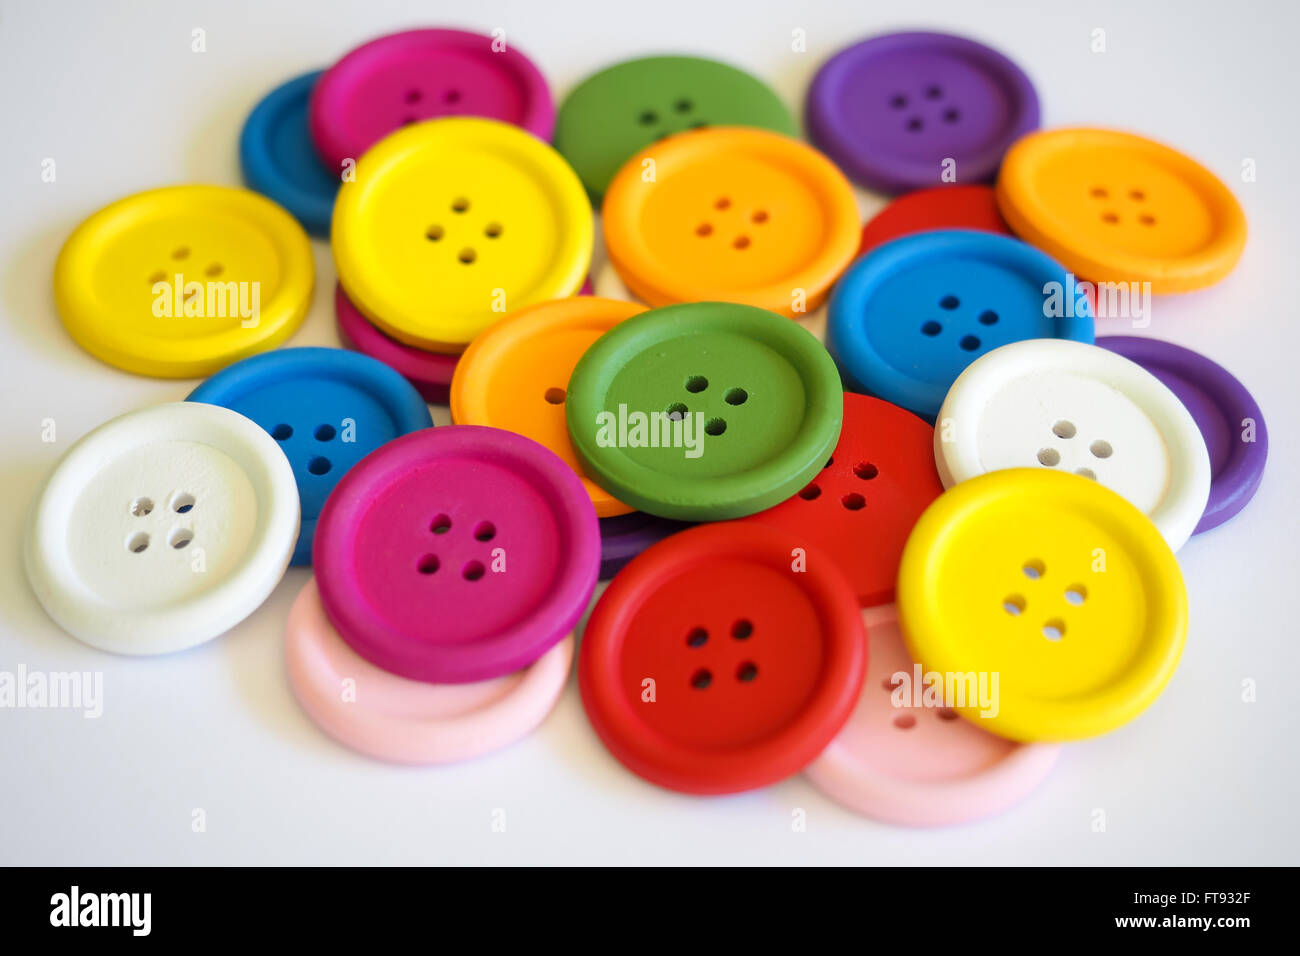 Buttons Bold Colors 2. A collection of boldly colored, painted wooden buttons. Stock Photo